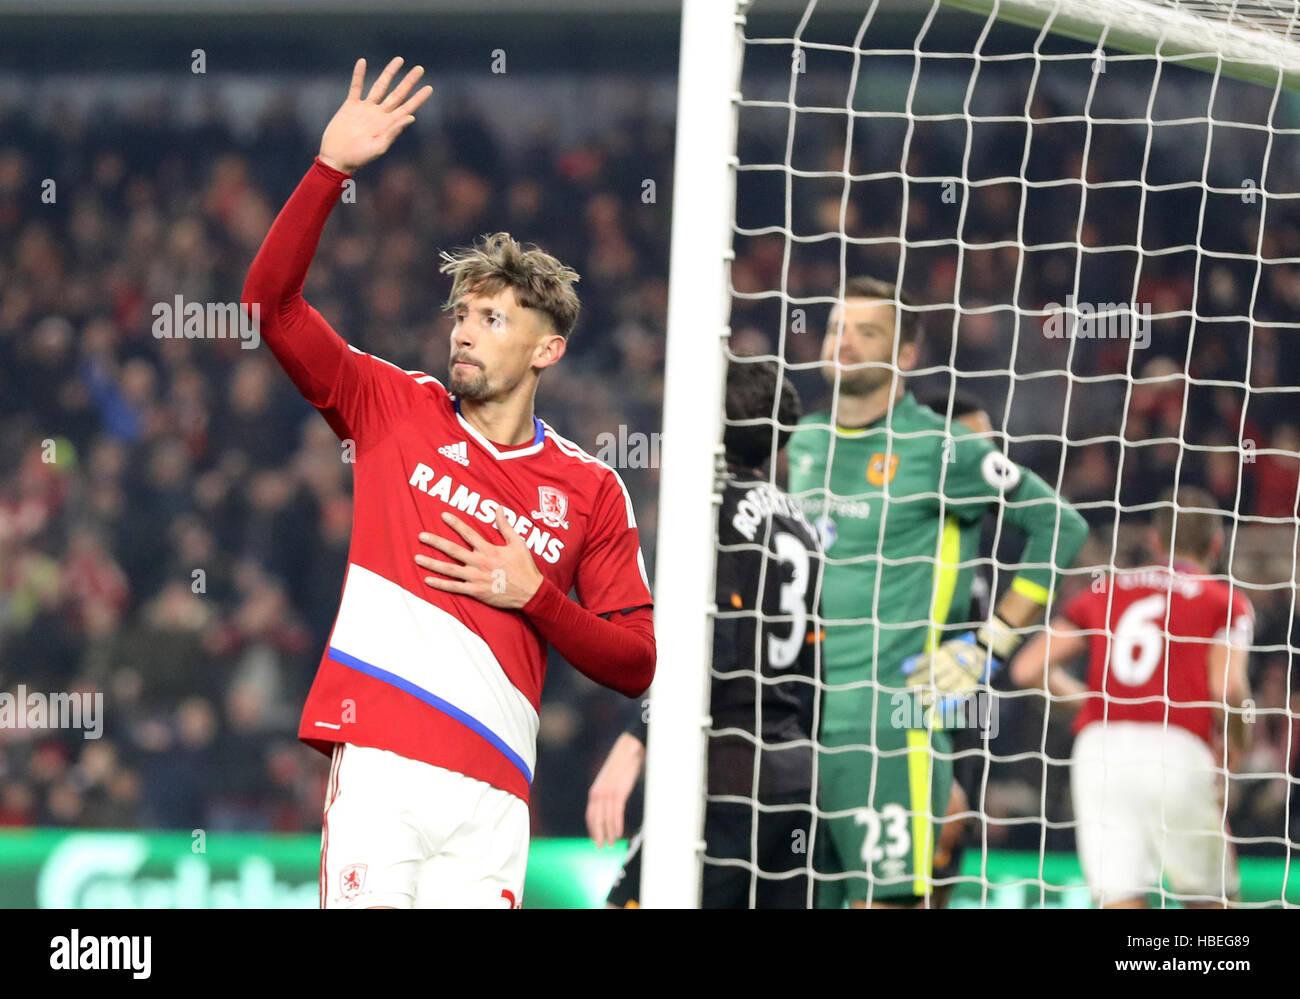 Middlesbrough's Gaston Ramirez celebrates scoring his side's first goal of the game during the Premier League match at the Riverside Stadium, Middlesbrough. Stock Photo